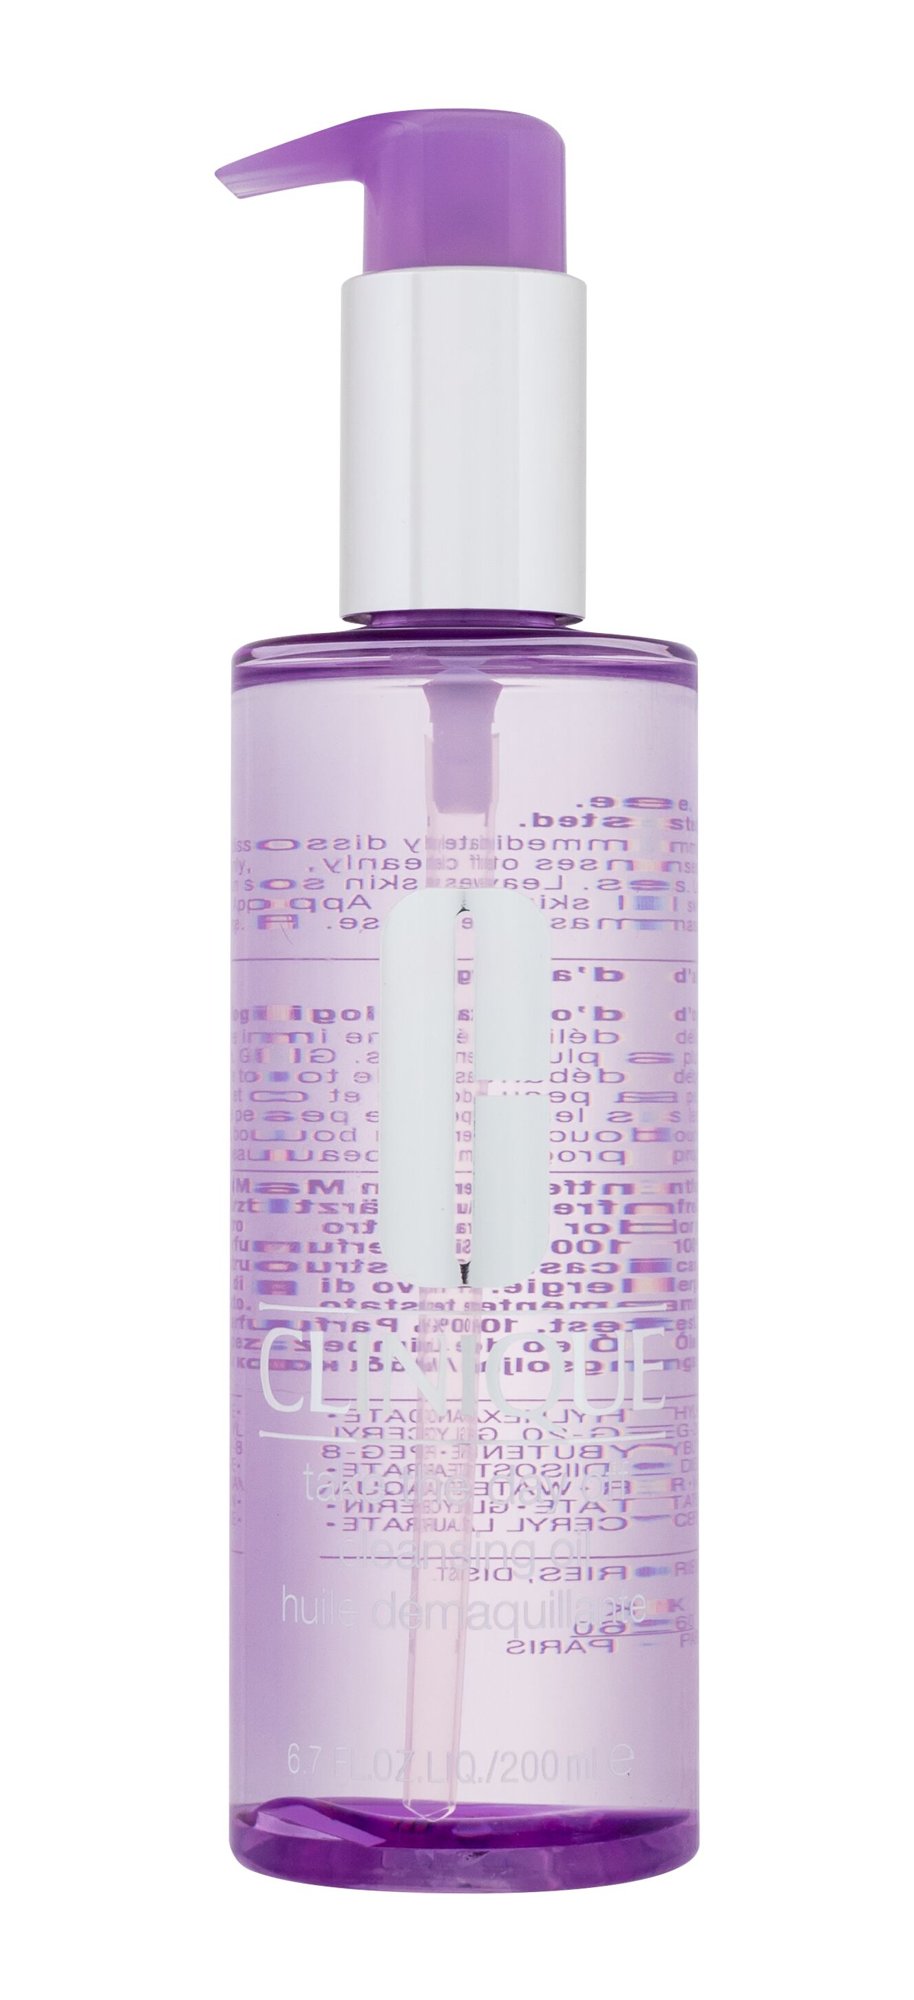 Clinique Take the Day Off Cleansing Oil veido aliejus